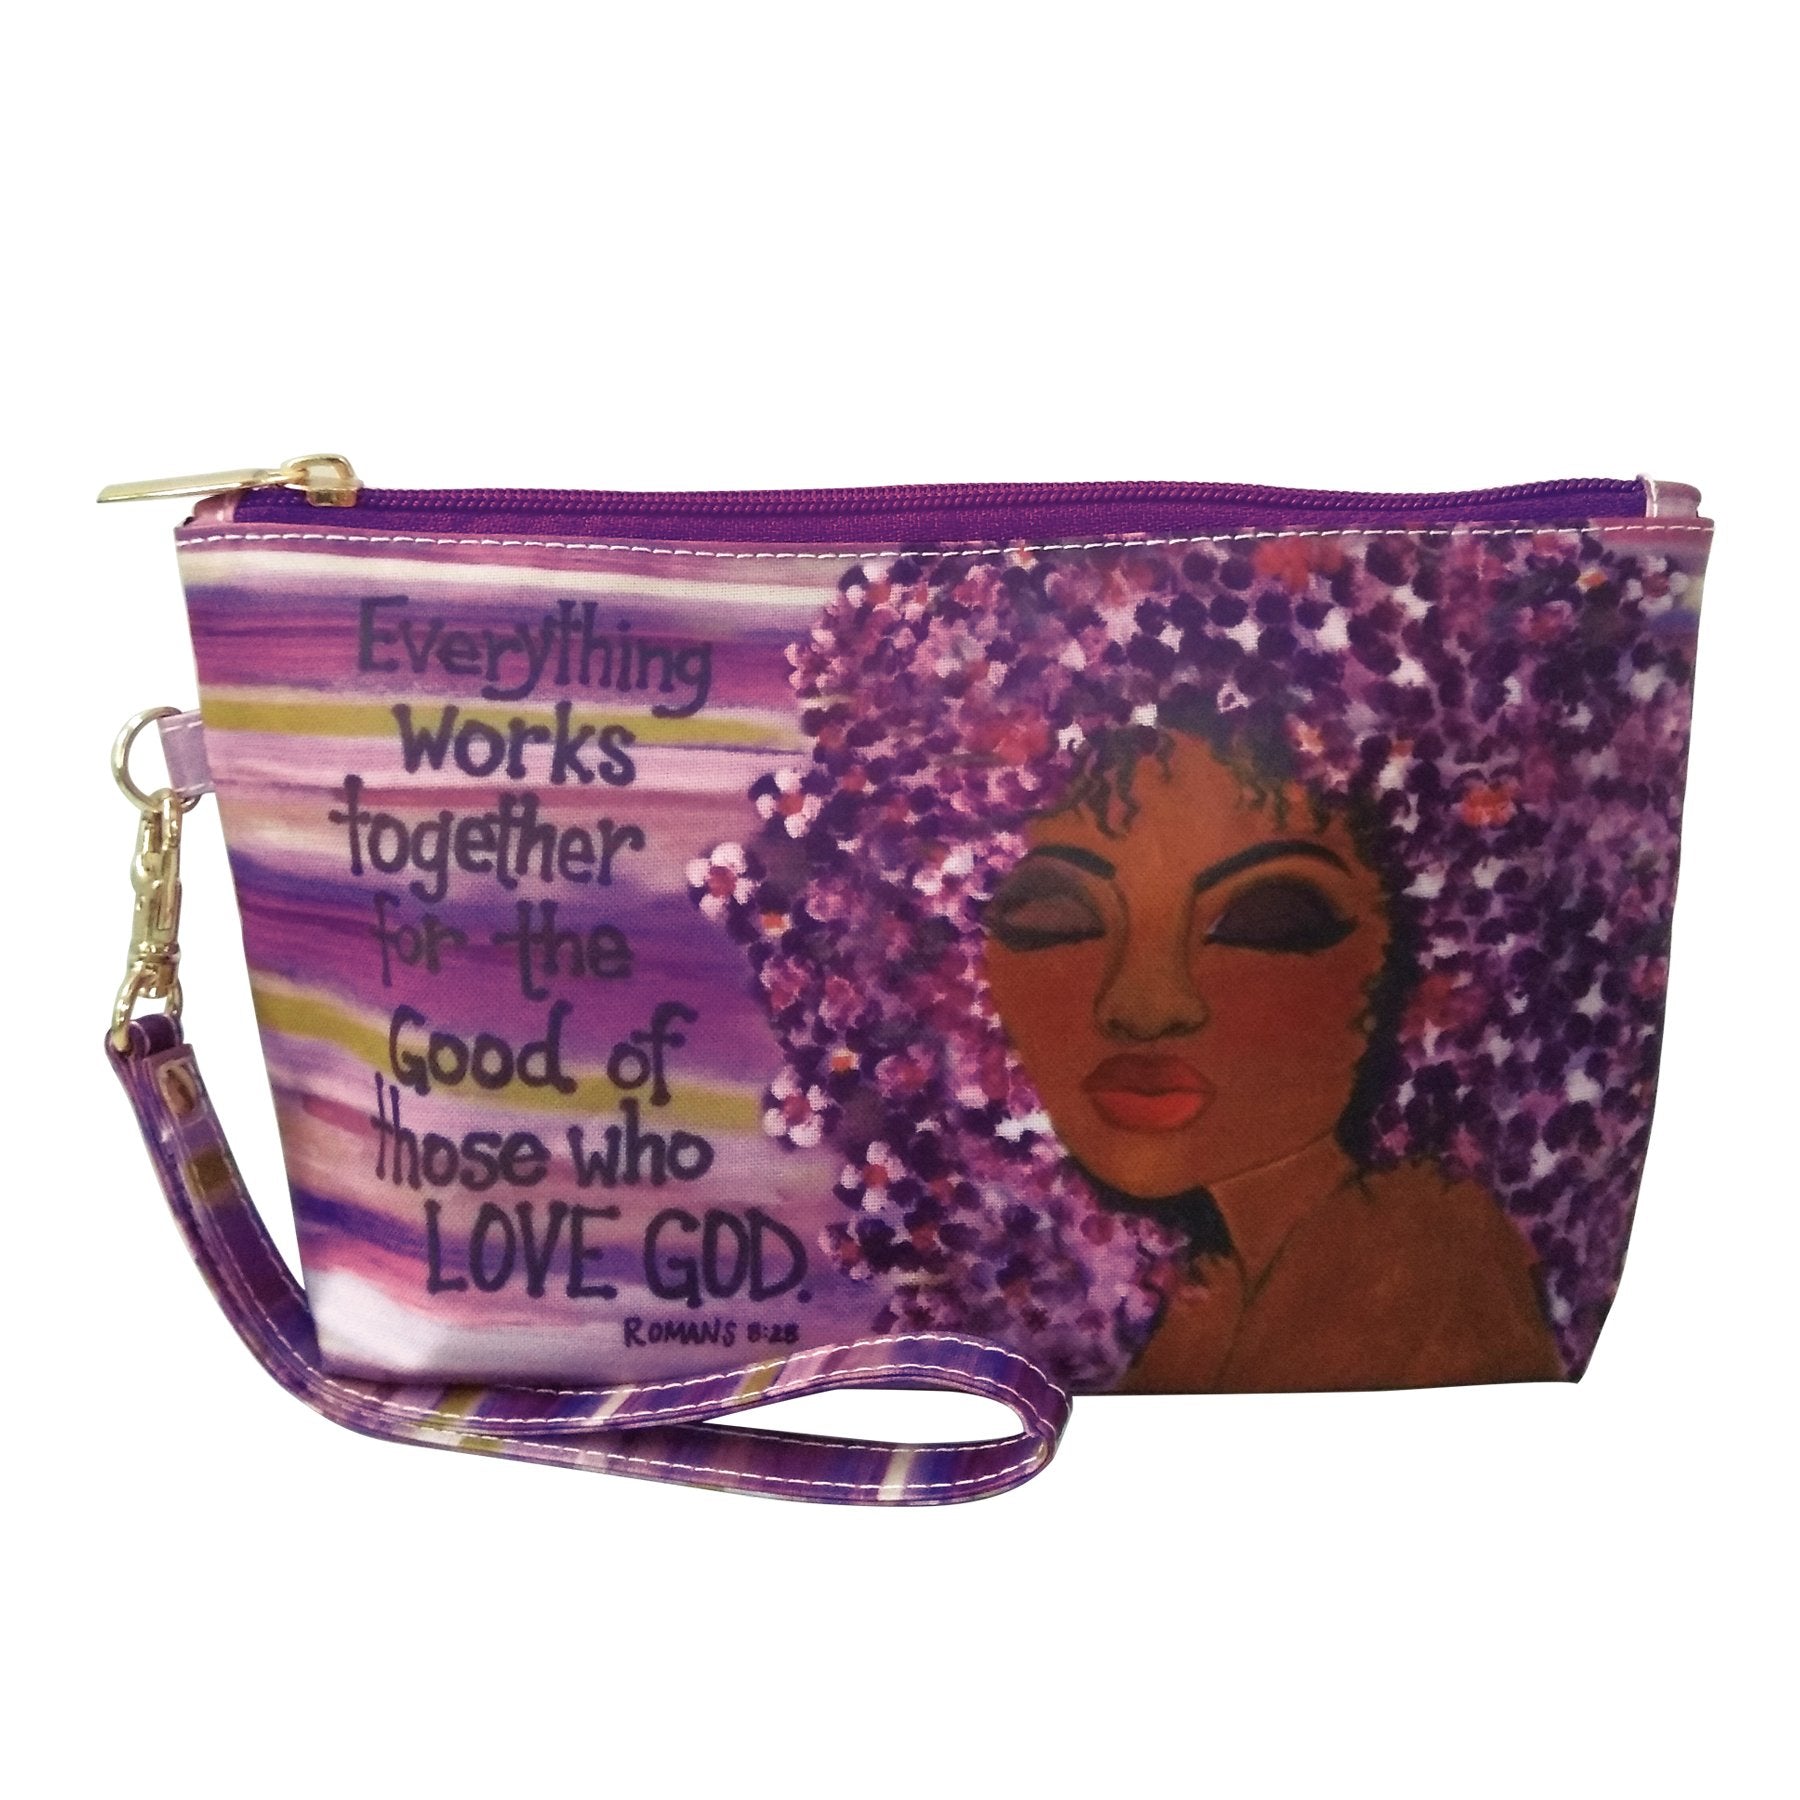 1 of 2: Love GOD: African American Cosmetic Bag by Sylvia 